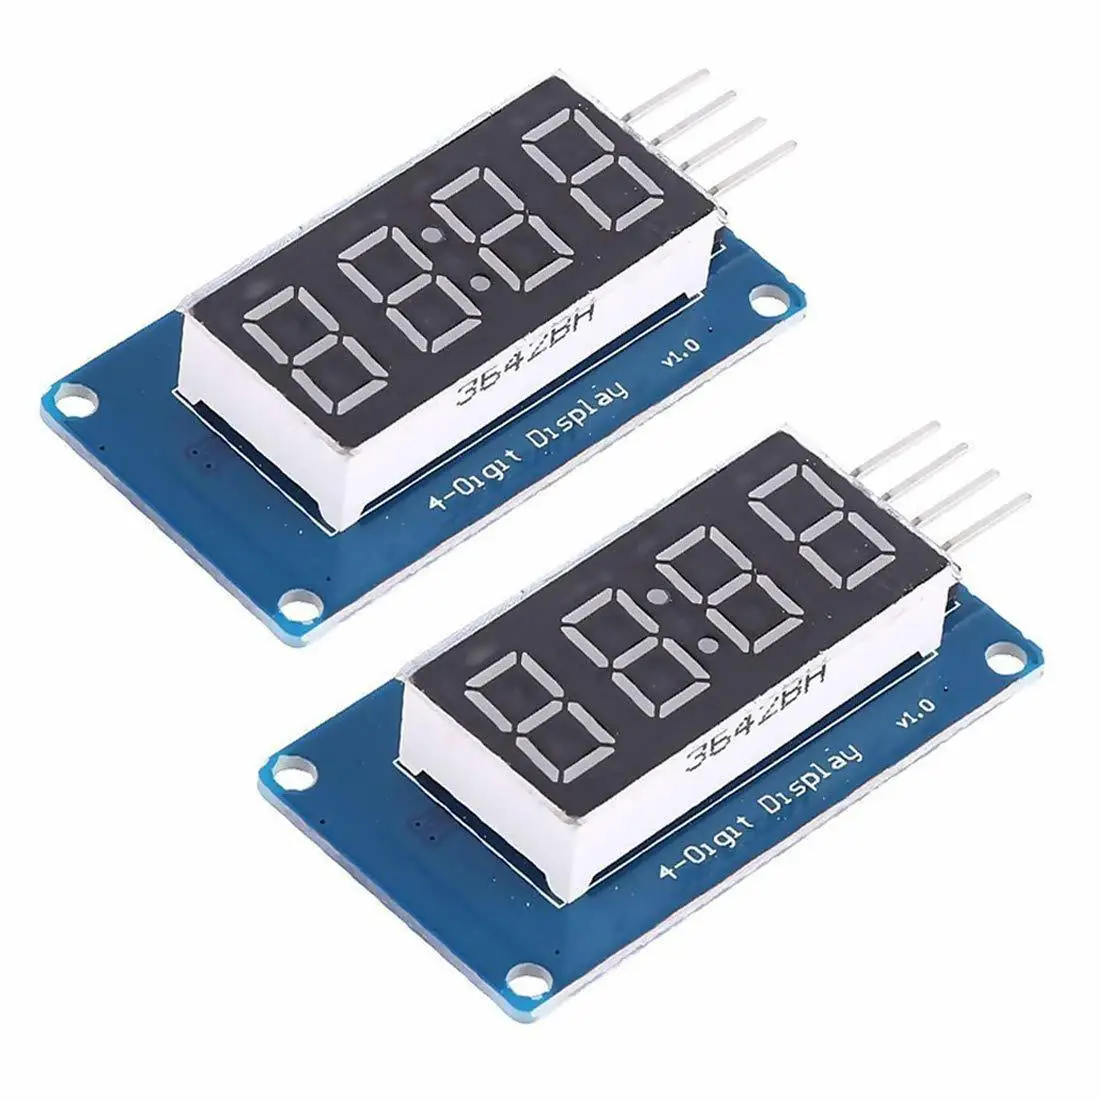 

0.36" 4-digit Tube Led Segment Display Module Red Common Anode Tm1637 Drive Chip Tube Clock Display For Arduino Uno R3